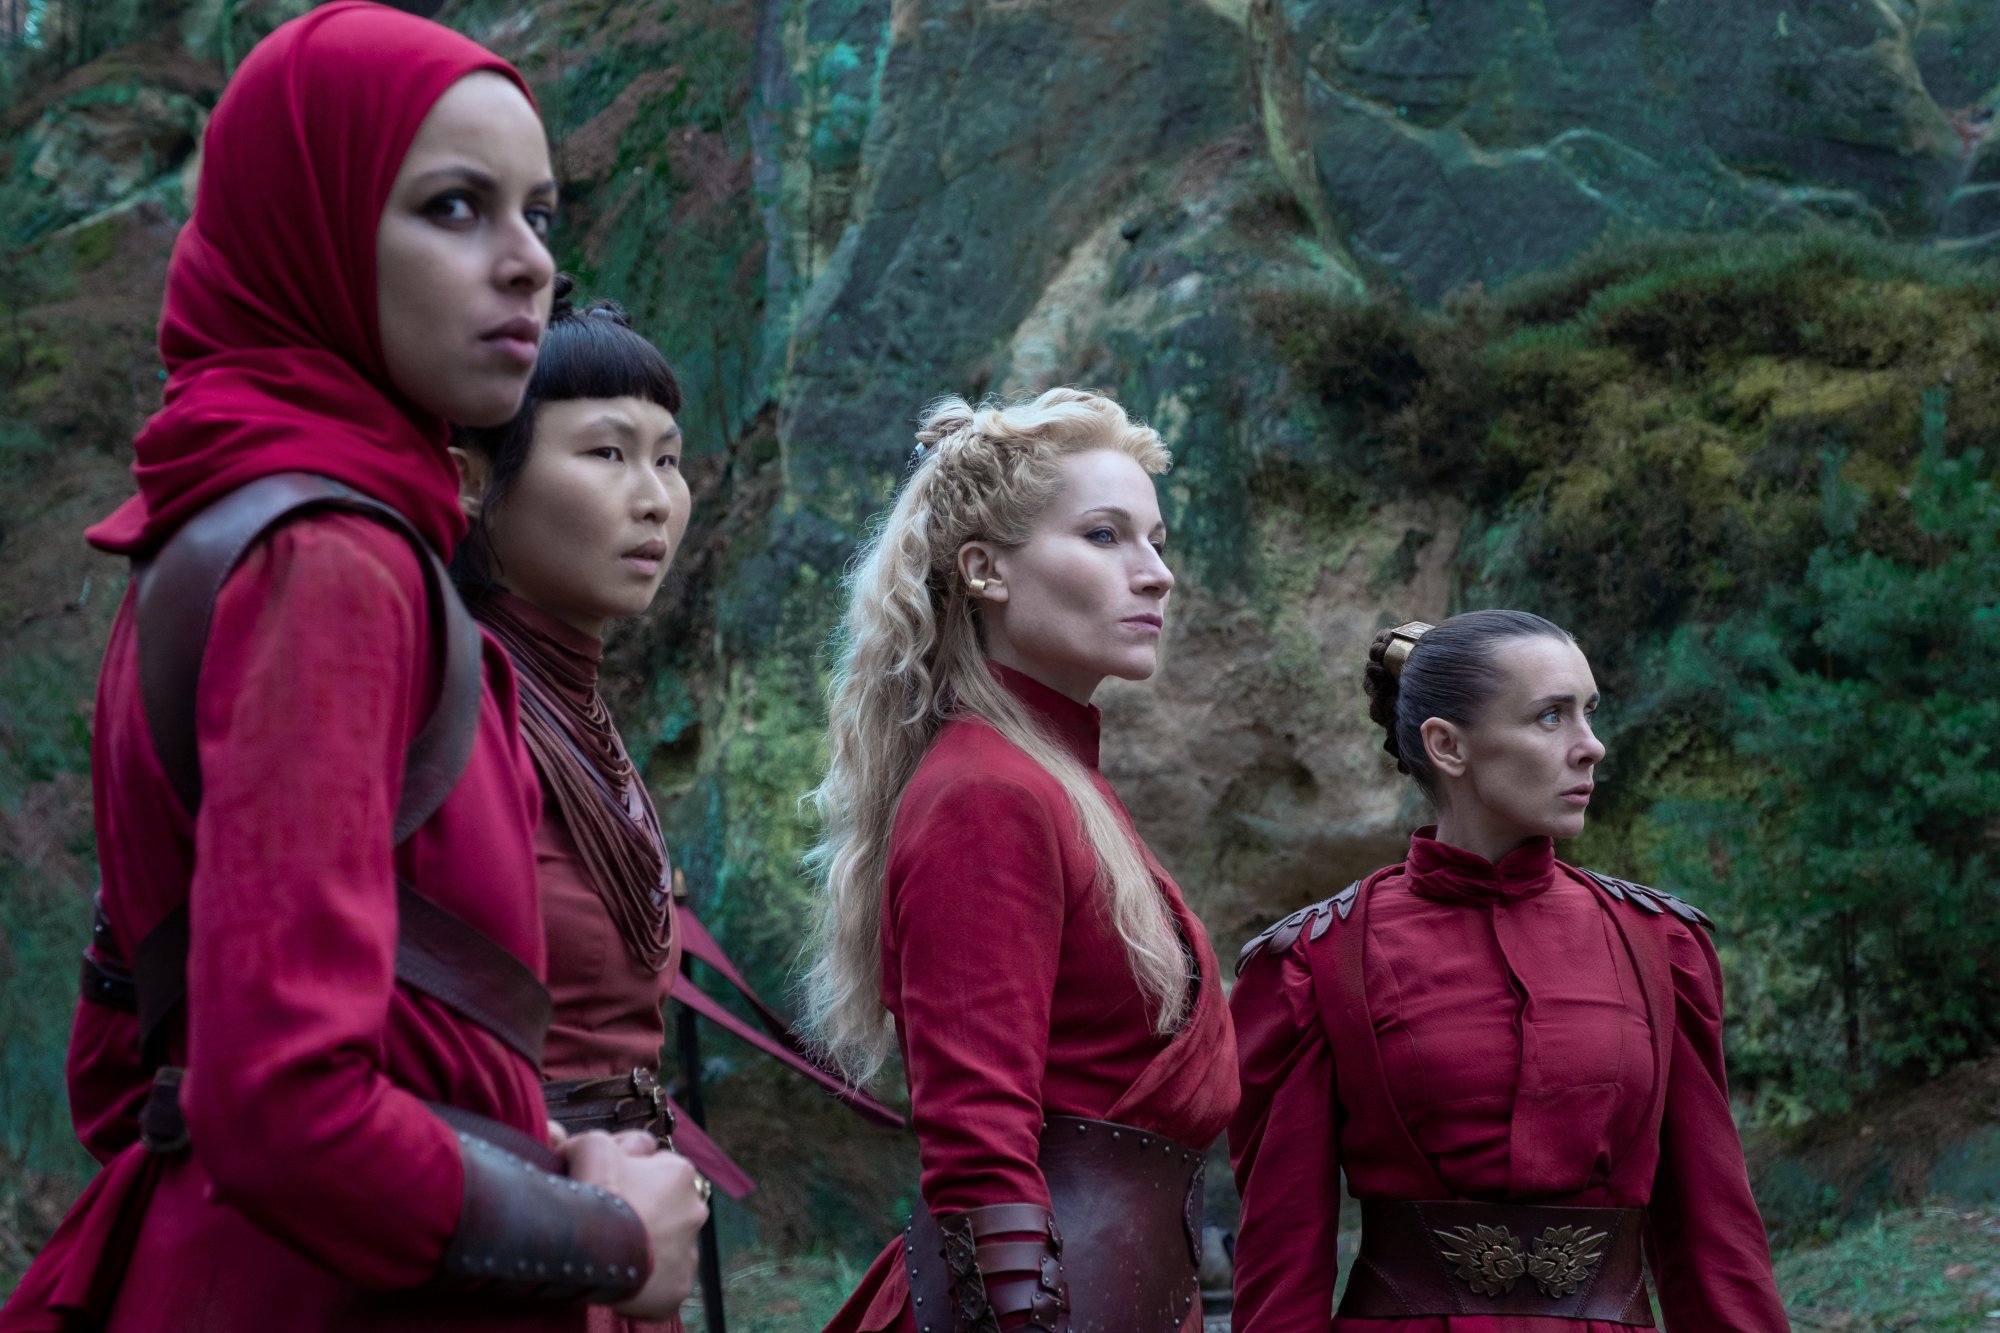 Kate Fleetwood as Liandrin Guirale surrounded by several unnamed Aes Sedai in Amazon Prime Video's 'The Wheel of Time' TV series. All four women are wearing red Ajah.